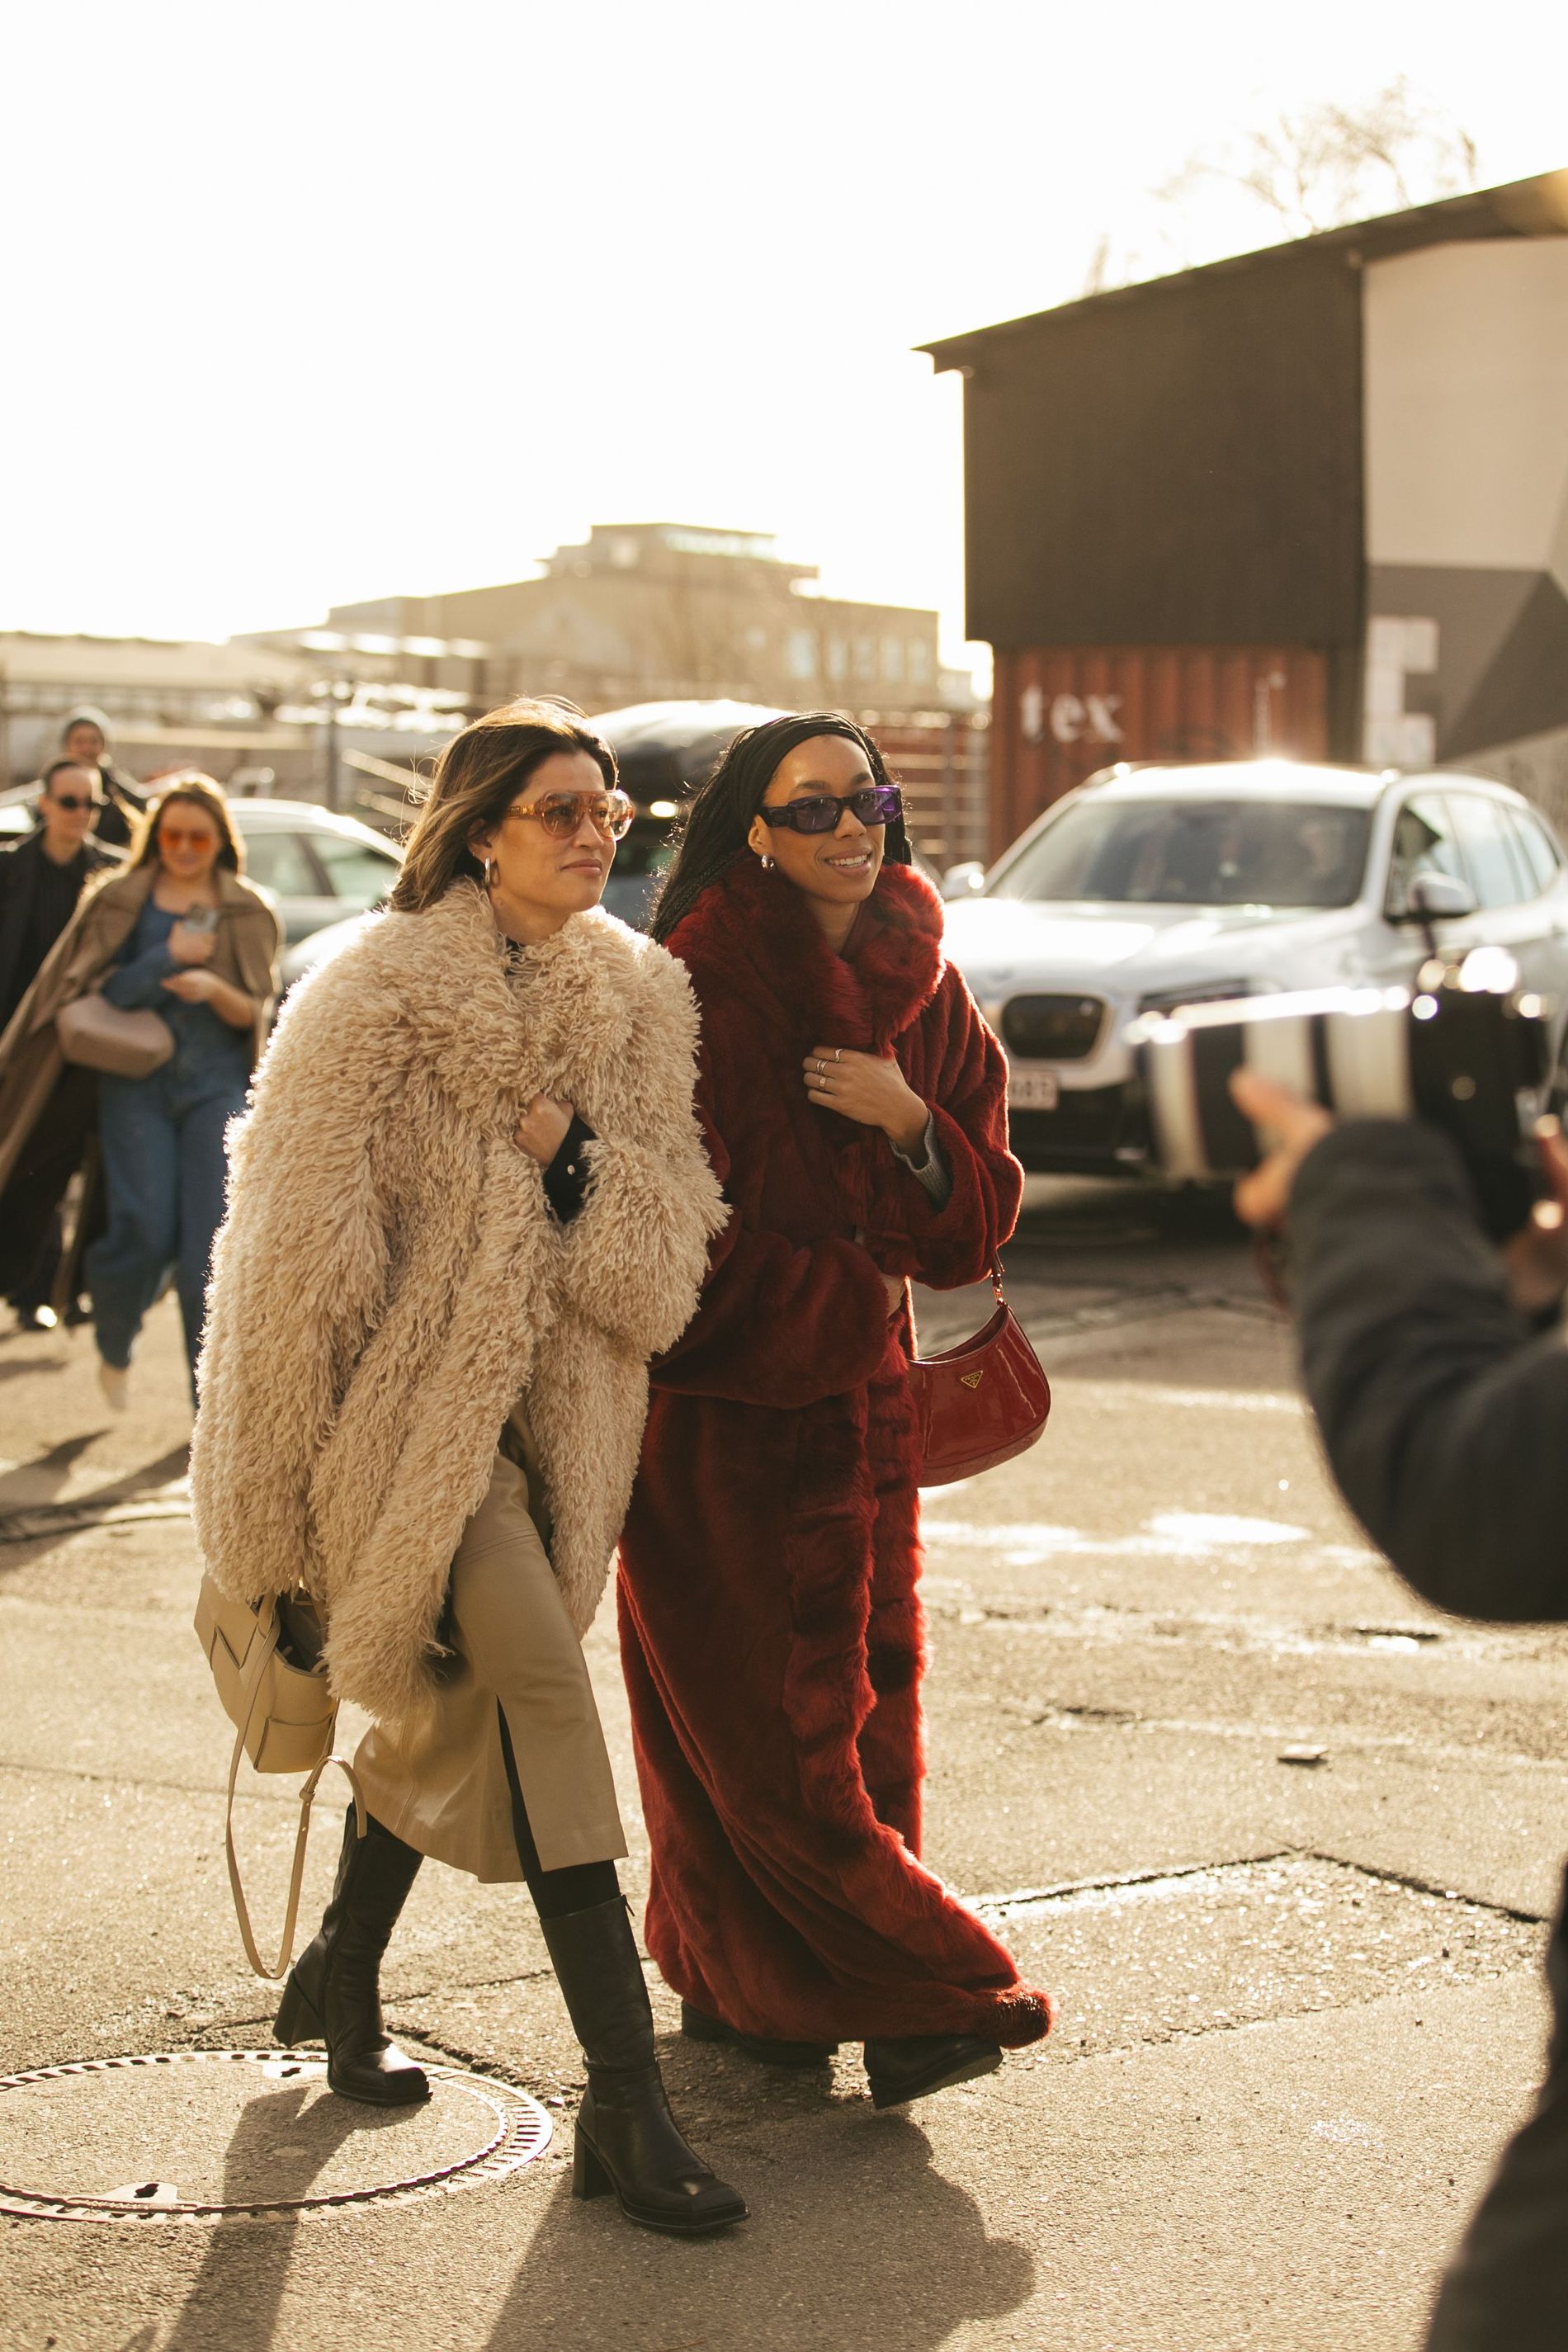 Two guests at CPHFW poses for a street style photo wearing monochromatic red and beige looks featuring fur coats